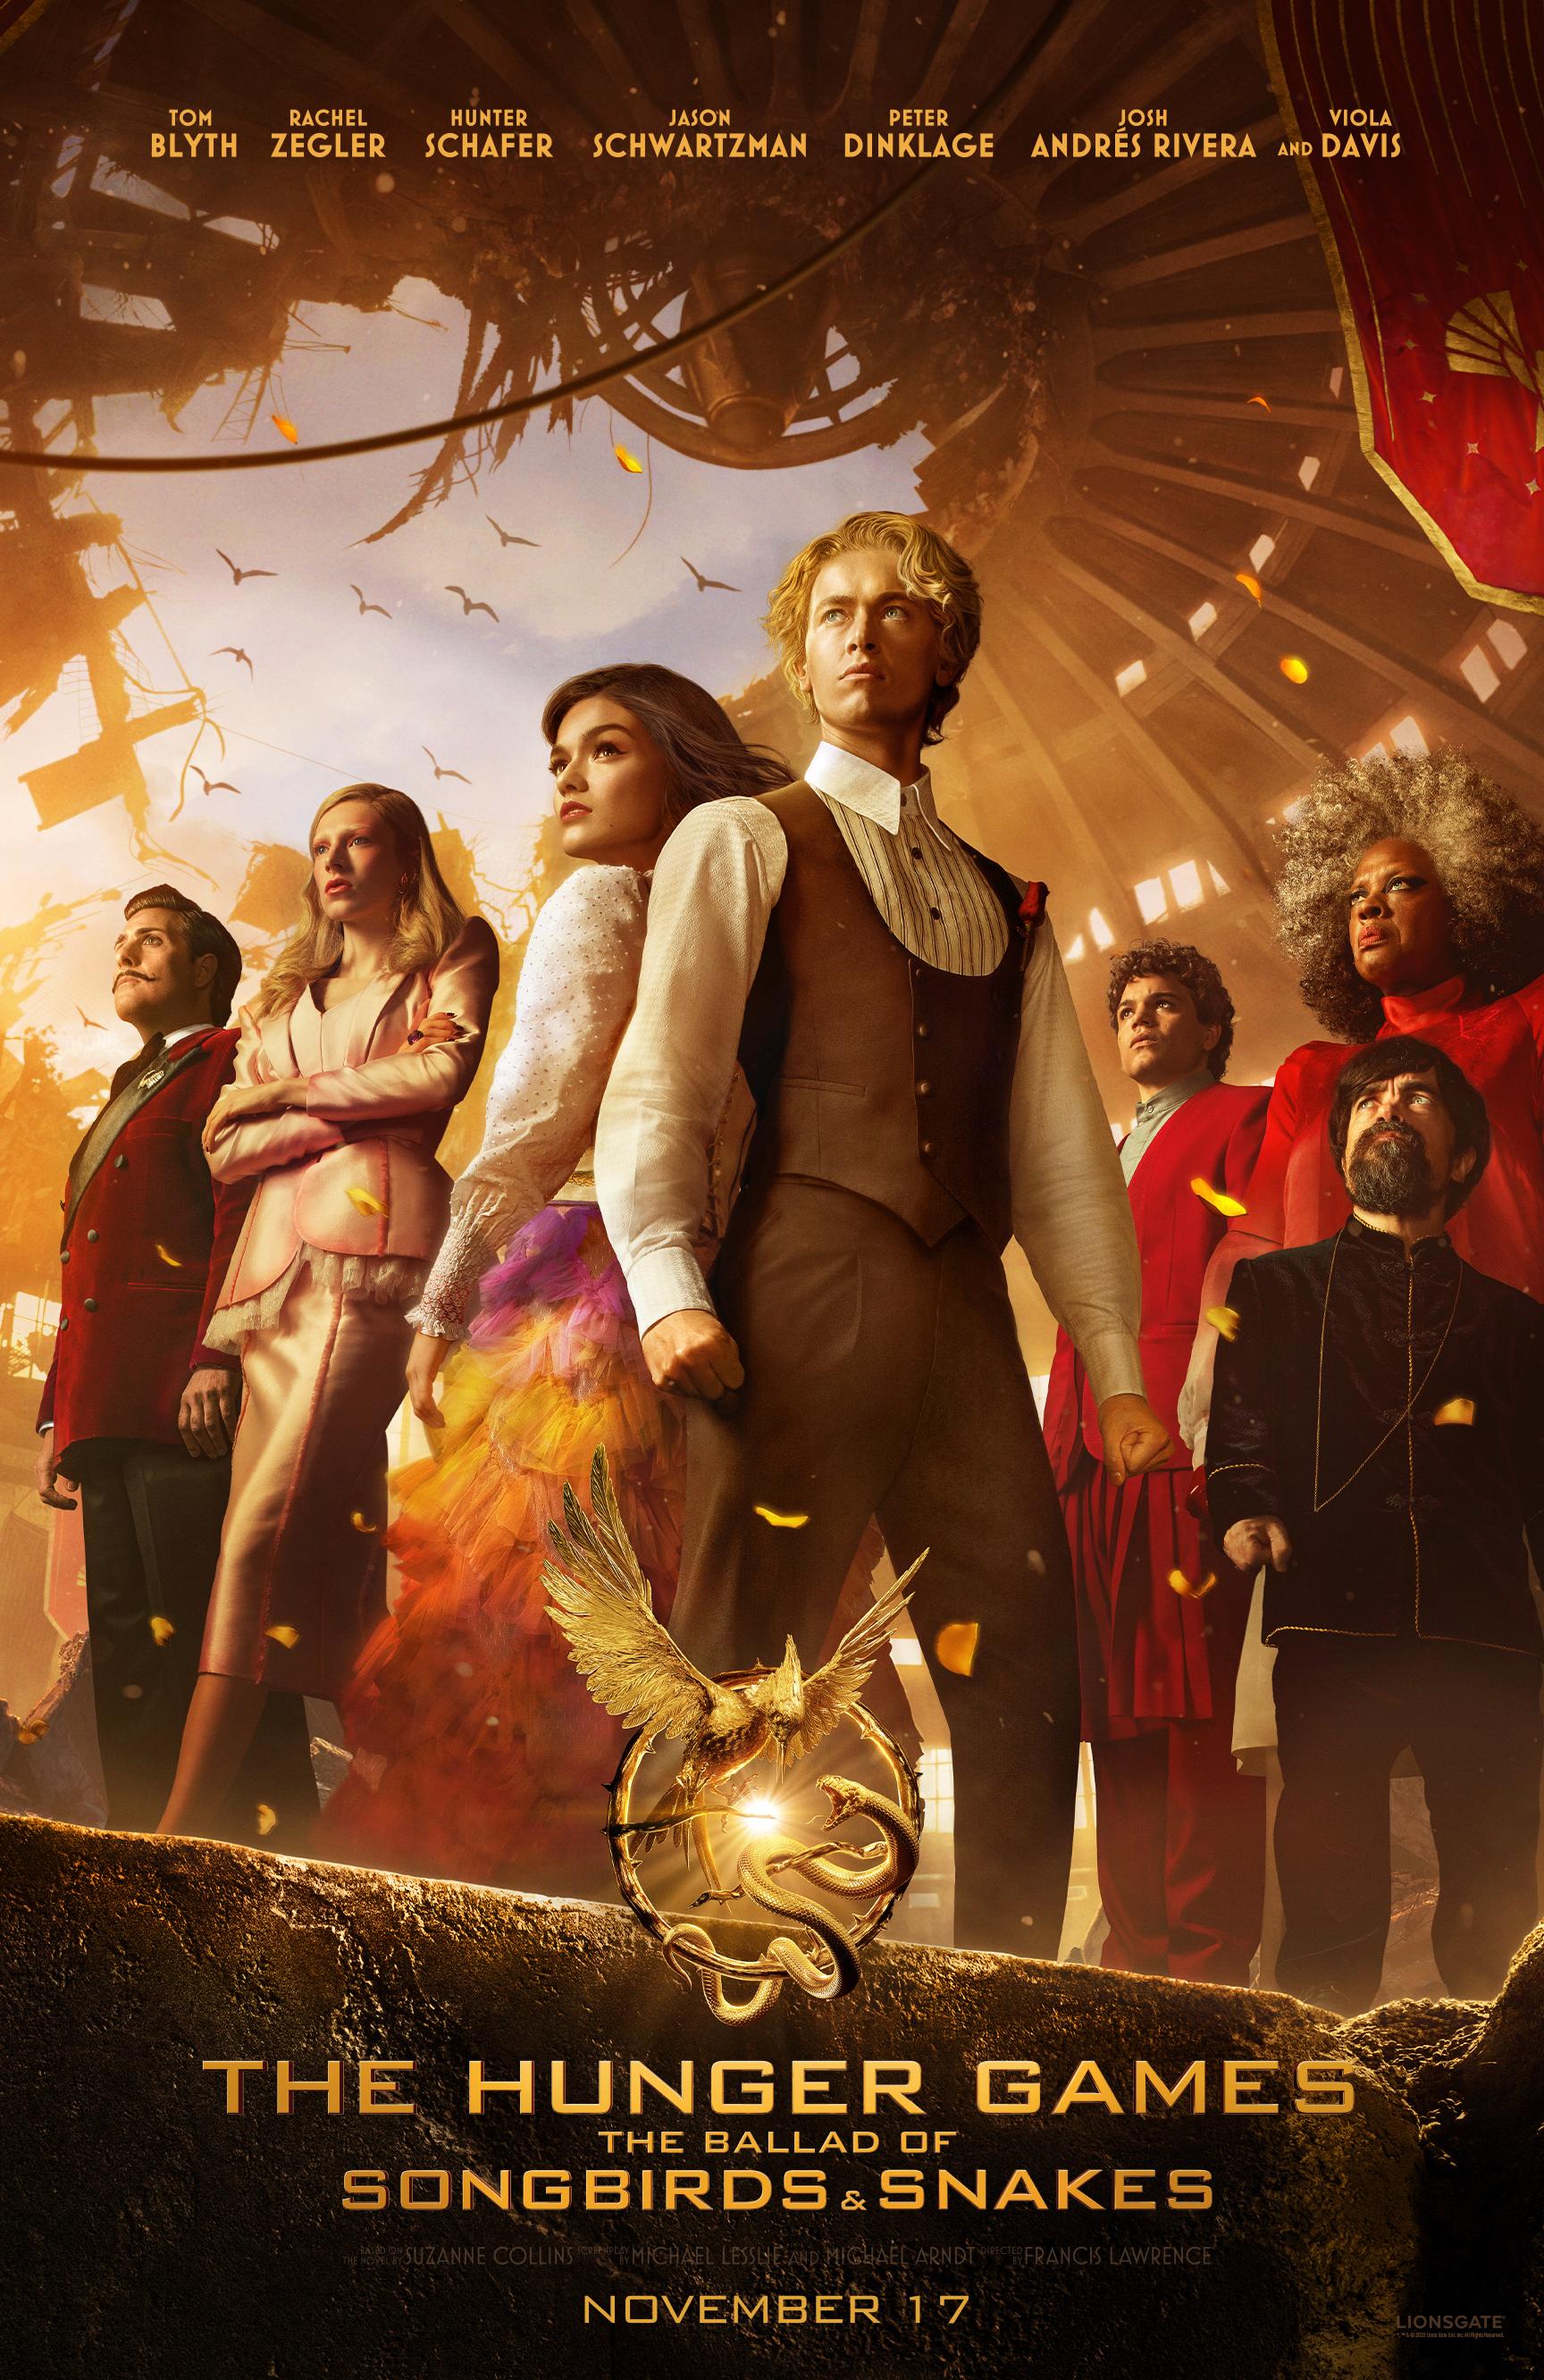 Watch trailer for the hunger games: the ballad of songbirds and snakes